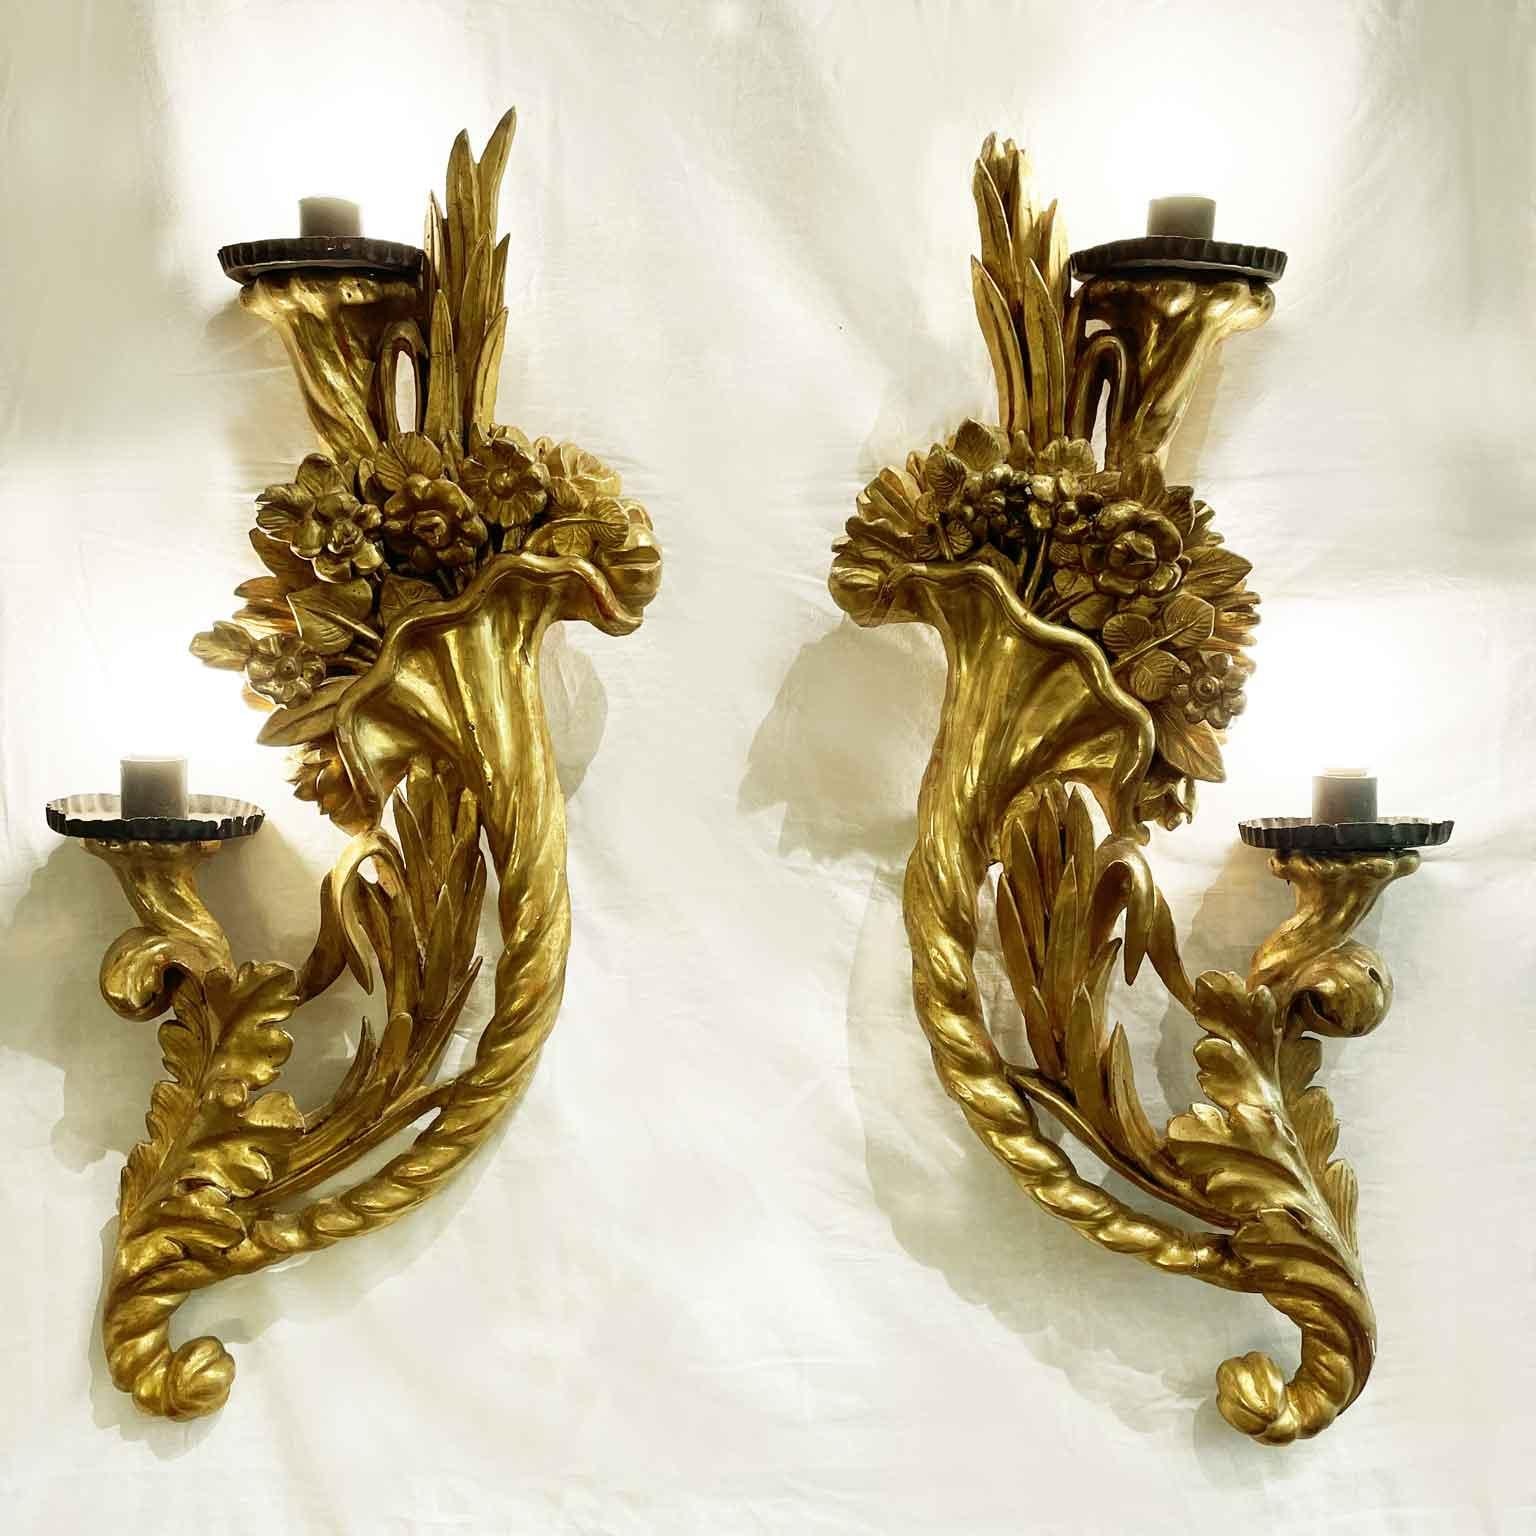 Pair of 18th-century Italian Gilt Wood Carved Appliques with elegant cornucopias and Foliate and Floral Intaglio.  in good condition, are two very rare twisted cornucopias filled with carved flowers and plant and leaf motifs. The two horns of plenty